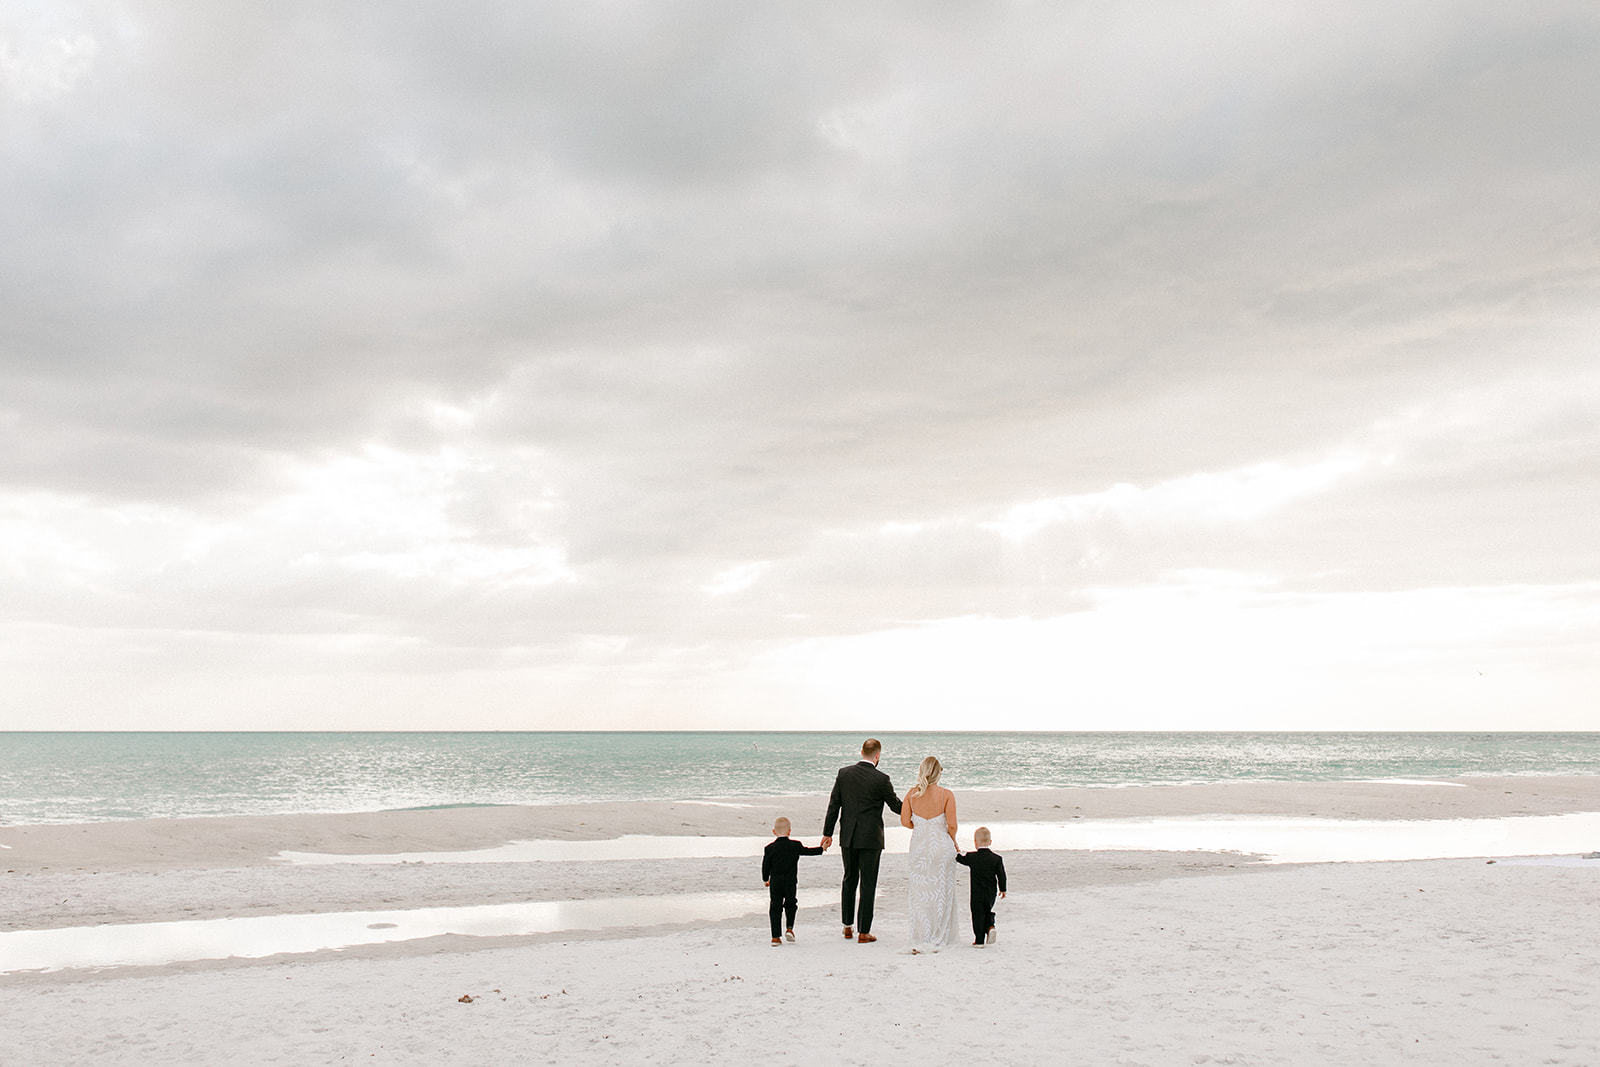 the family walking together across the sand at Anna Maria Island in Florida